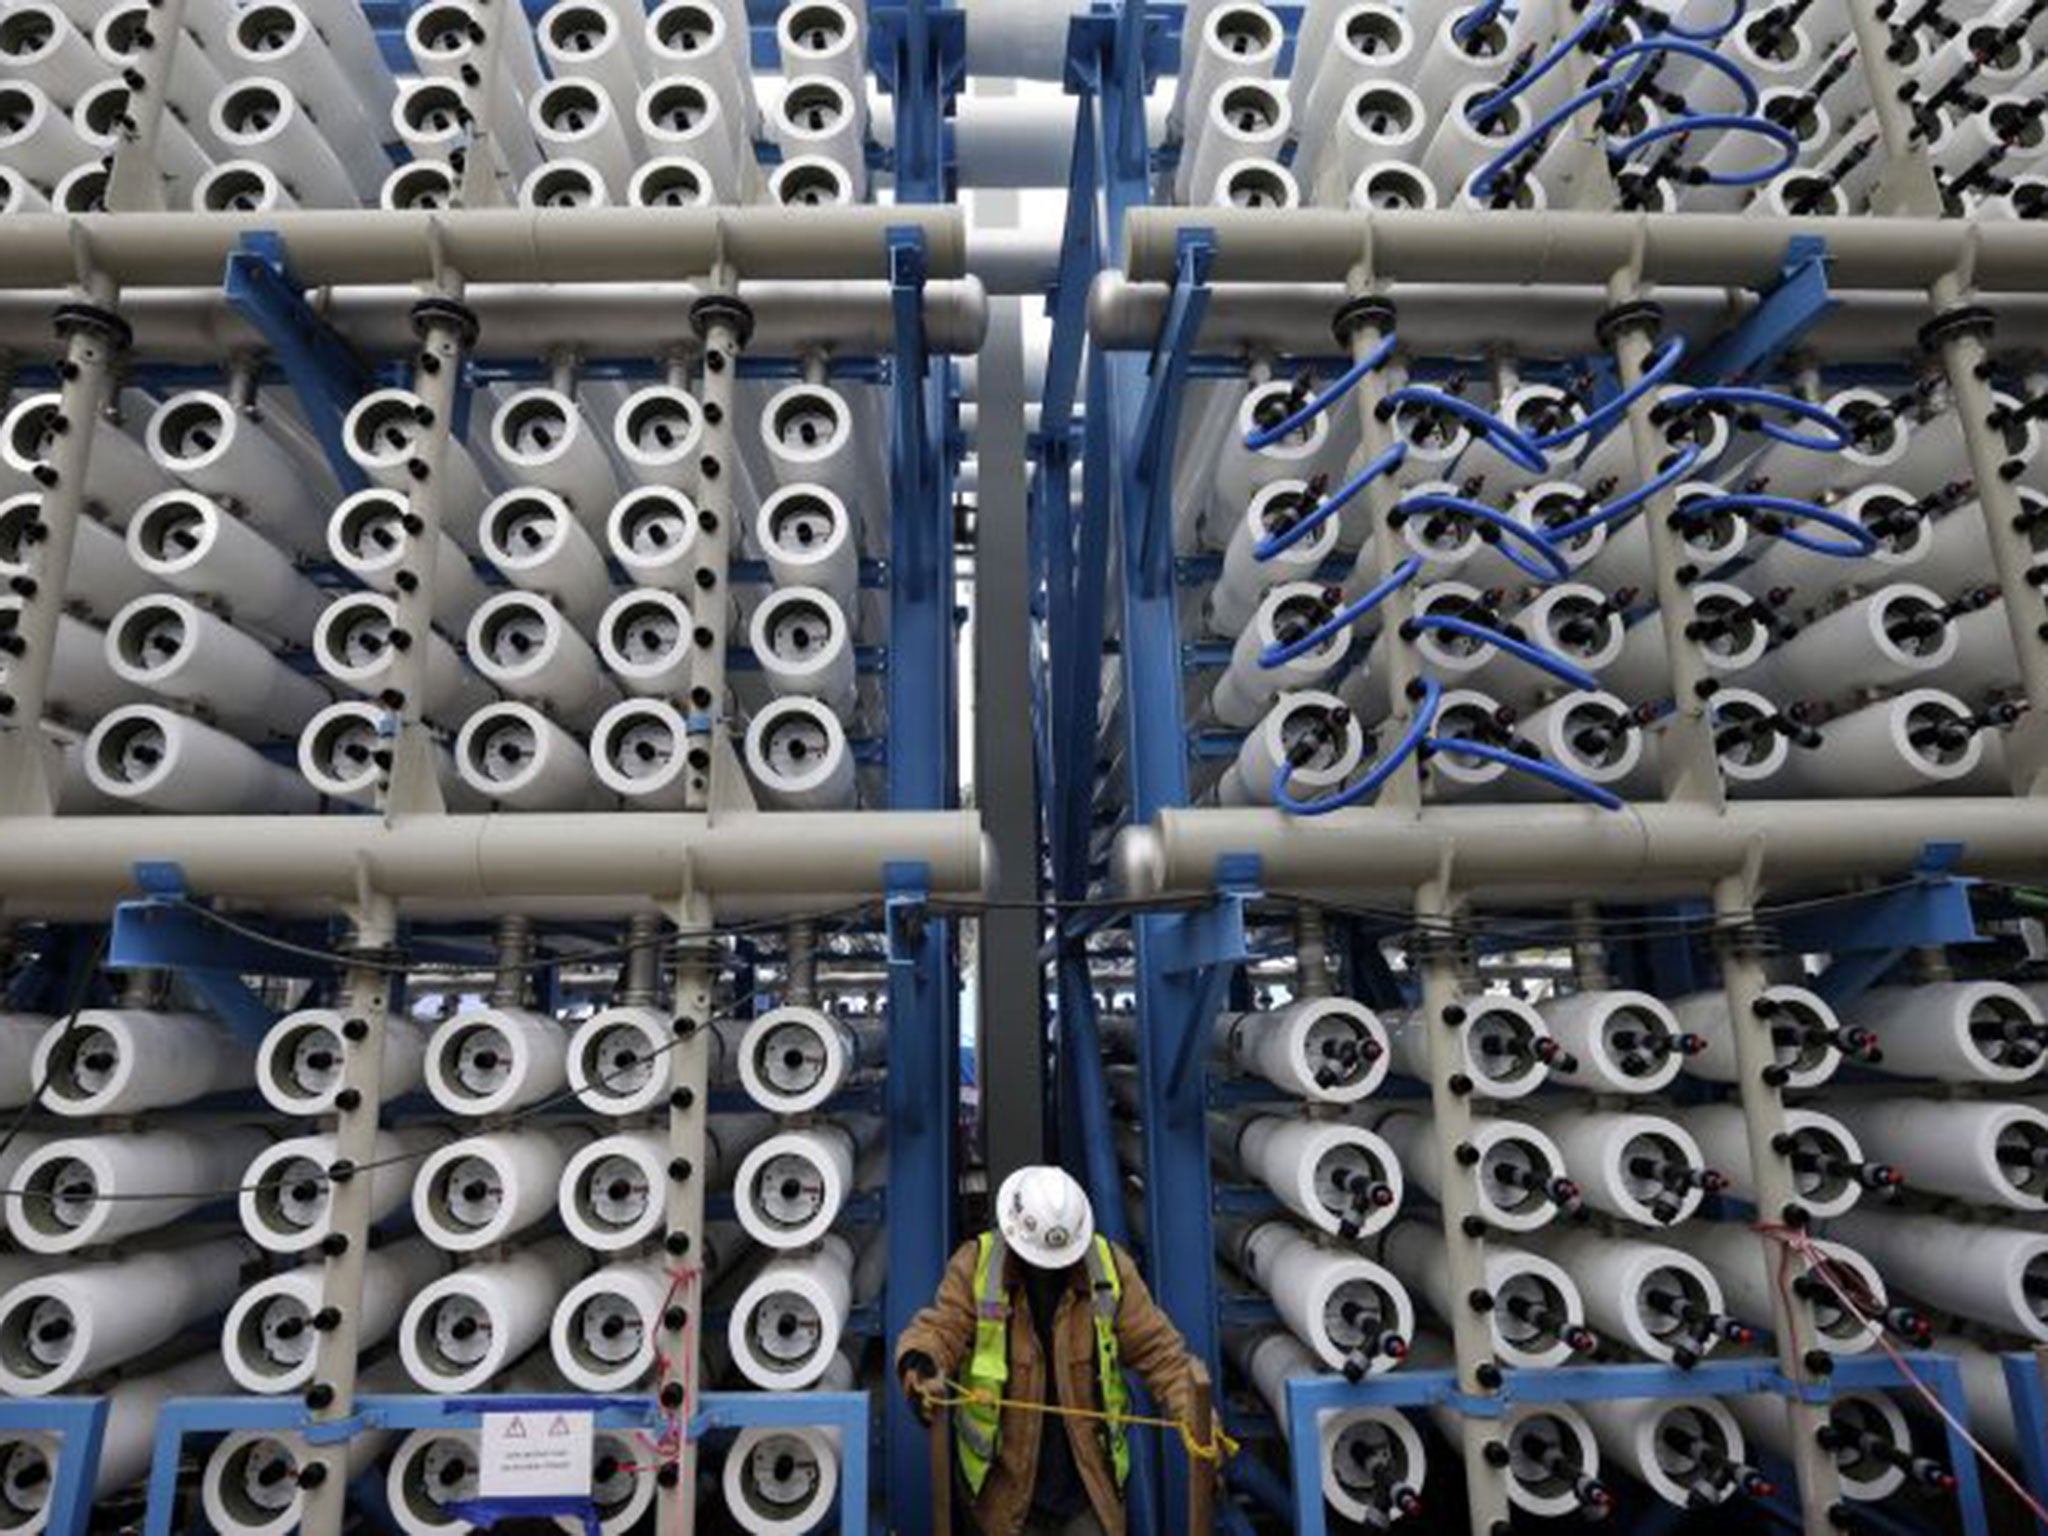 Some of the 2,000 pressure vessels used to convert seawater into fresh water through reverse osmosis at California’s Carlsbad Desalination Project